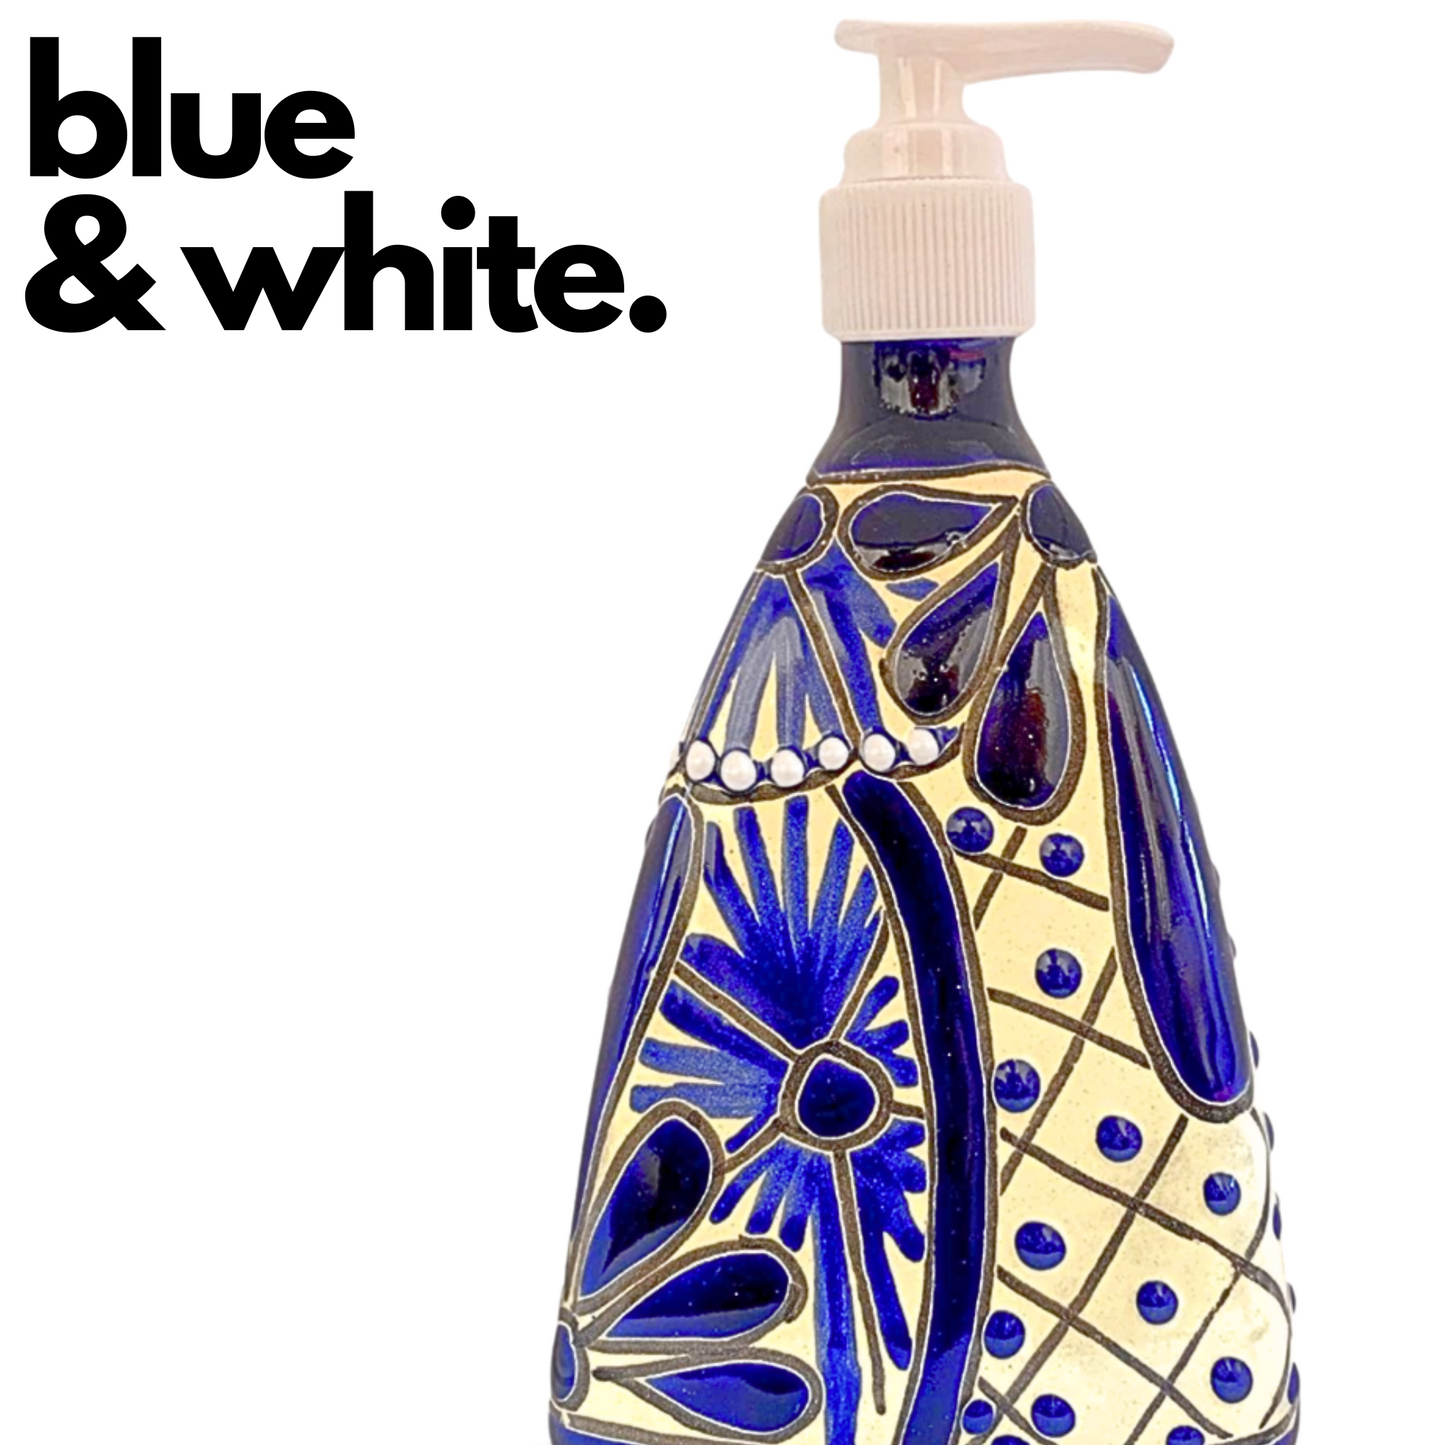 An eye-catching, hand-painted, Refillable Ceramic Soap Dispenser, skillfully crafted in Mexico. Perfect for adding a vibrant touch to any kitchen or bathroom. blue and white close up